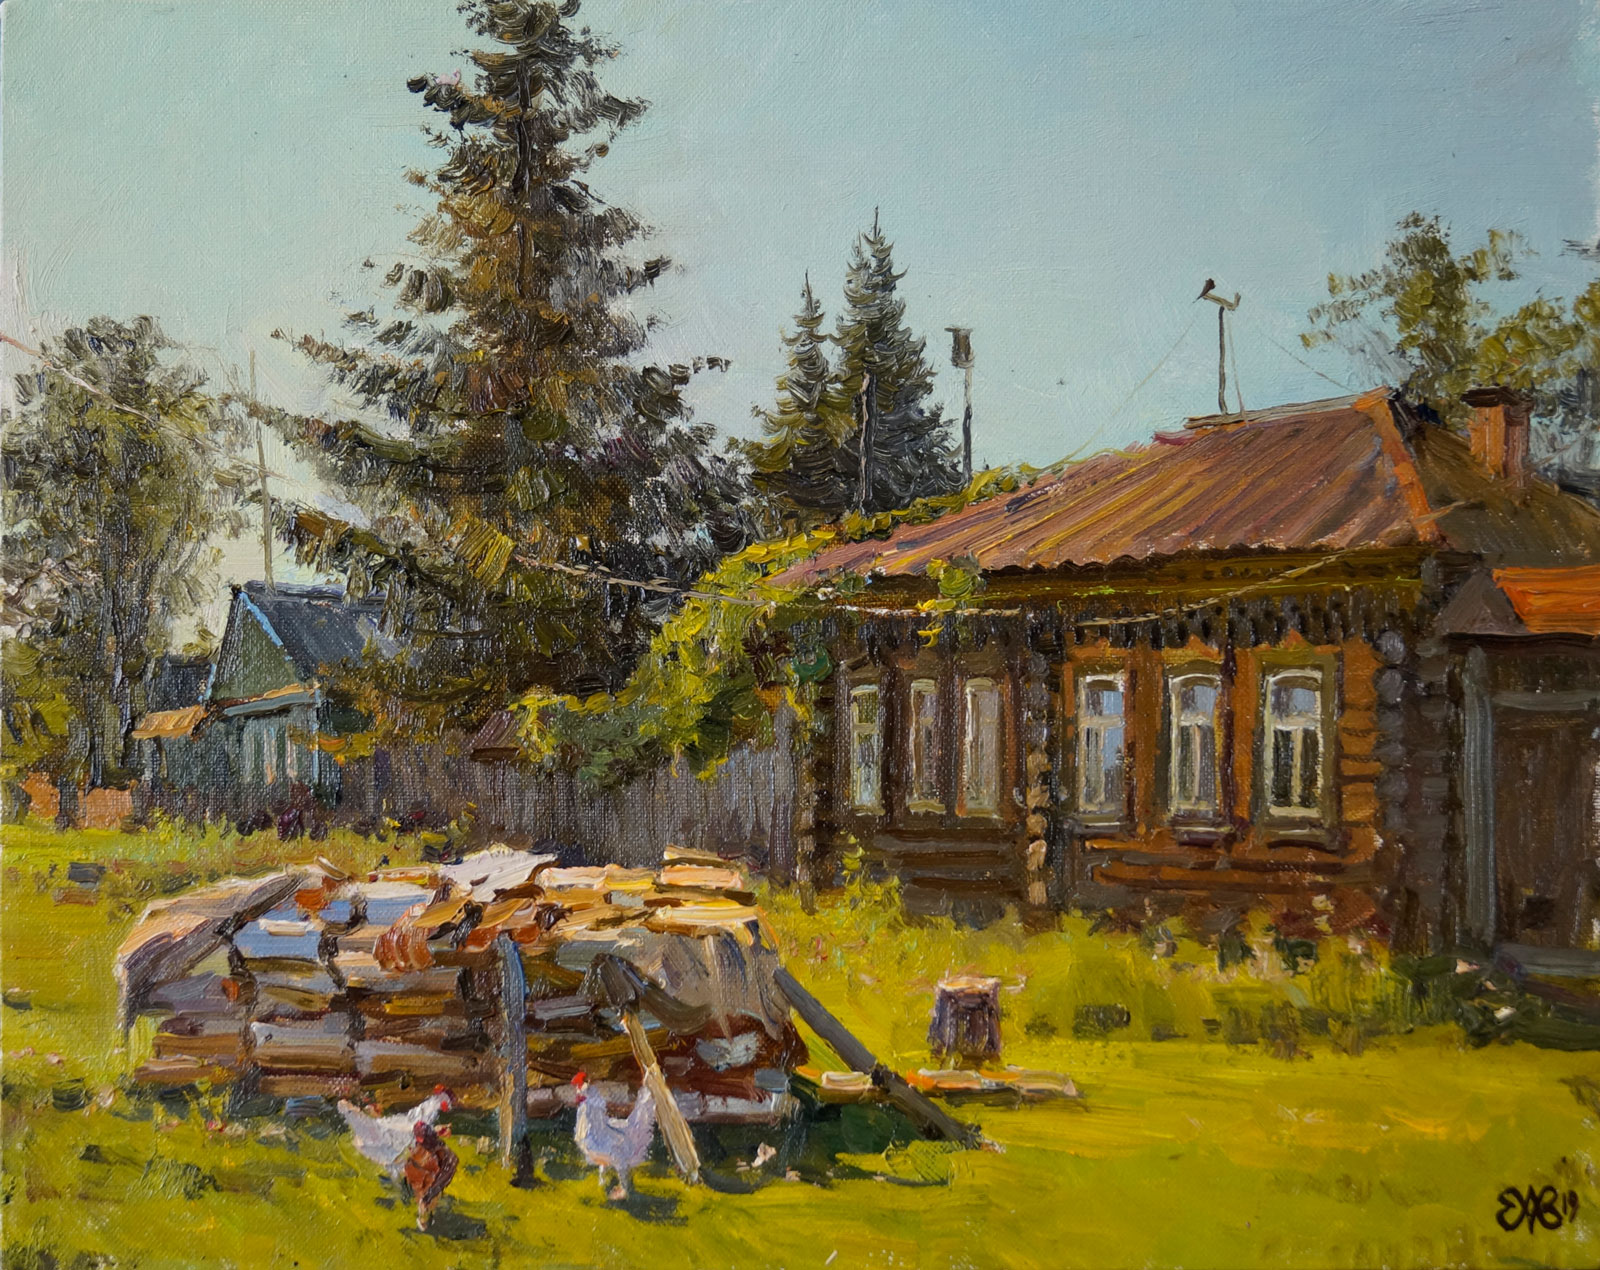 Firewood For Winter - 1, Alexey Efremov, Buy the painting Oil